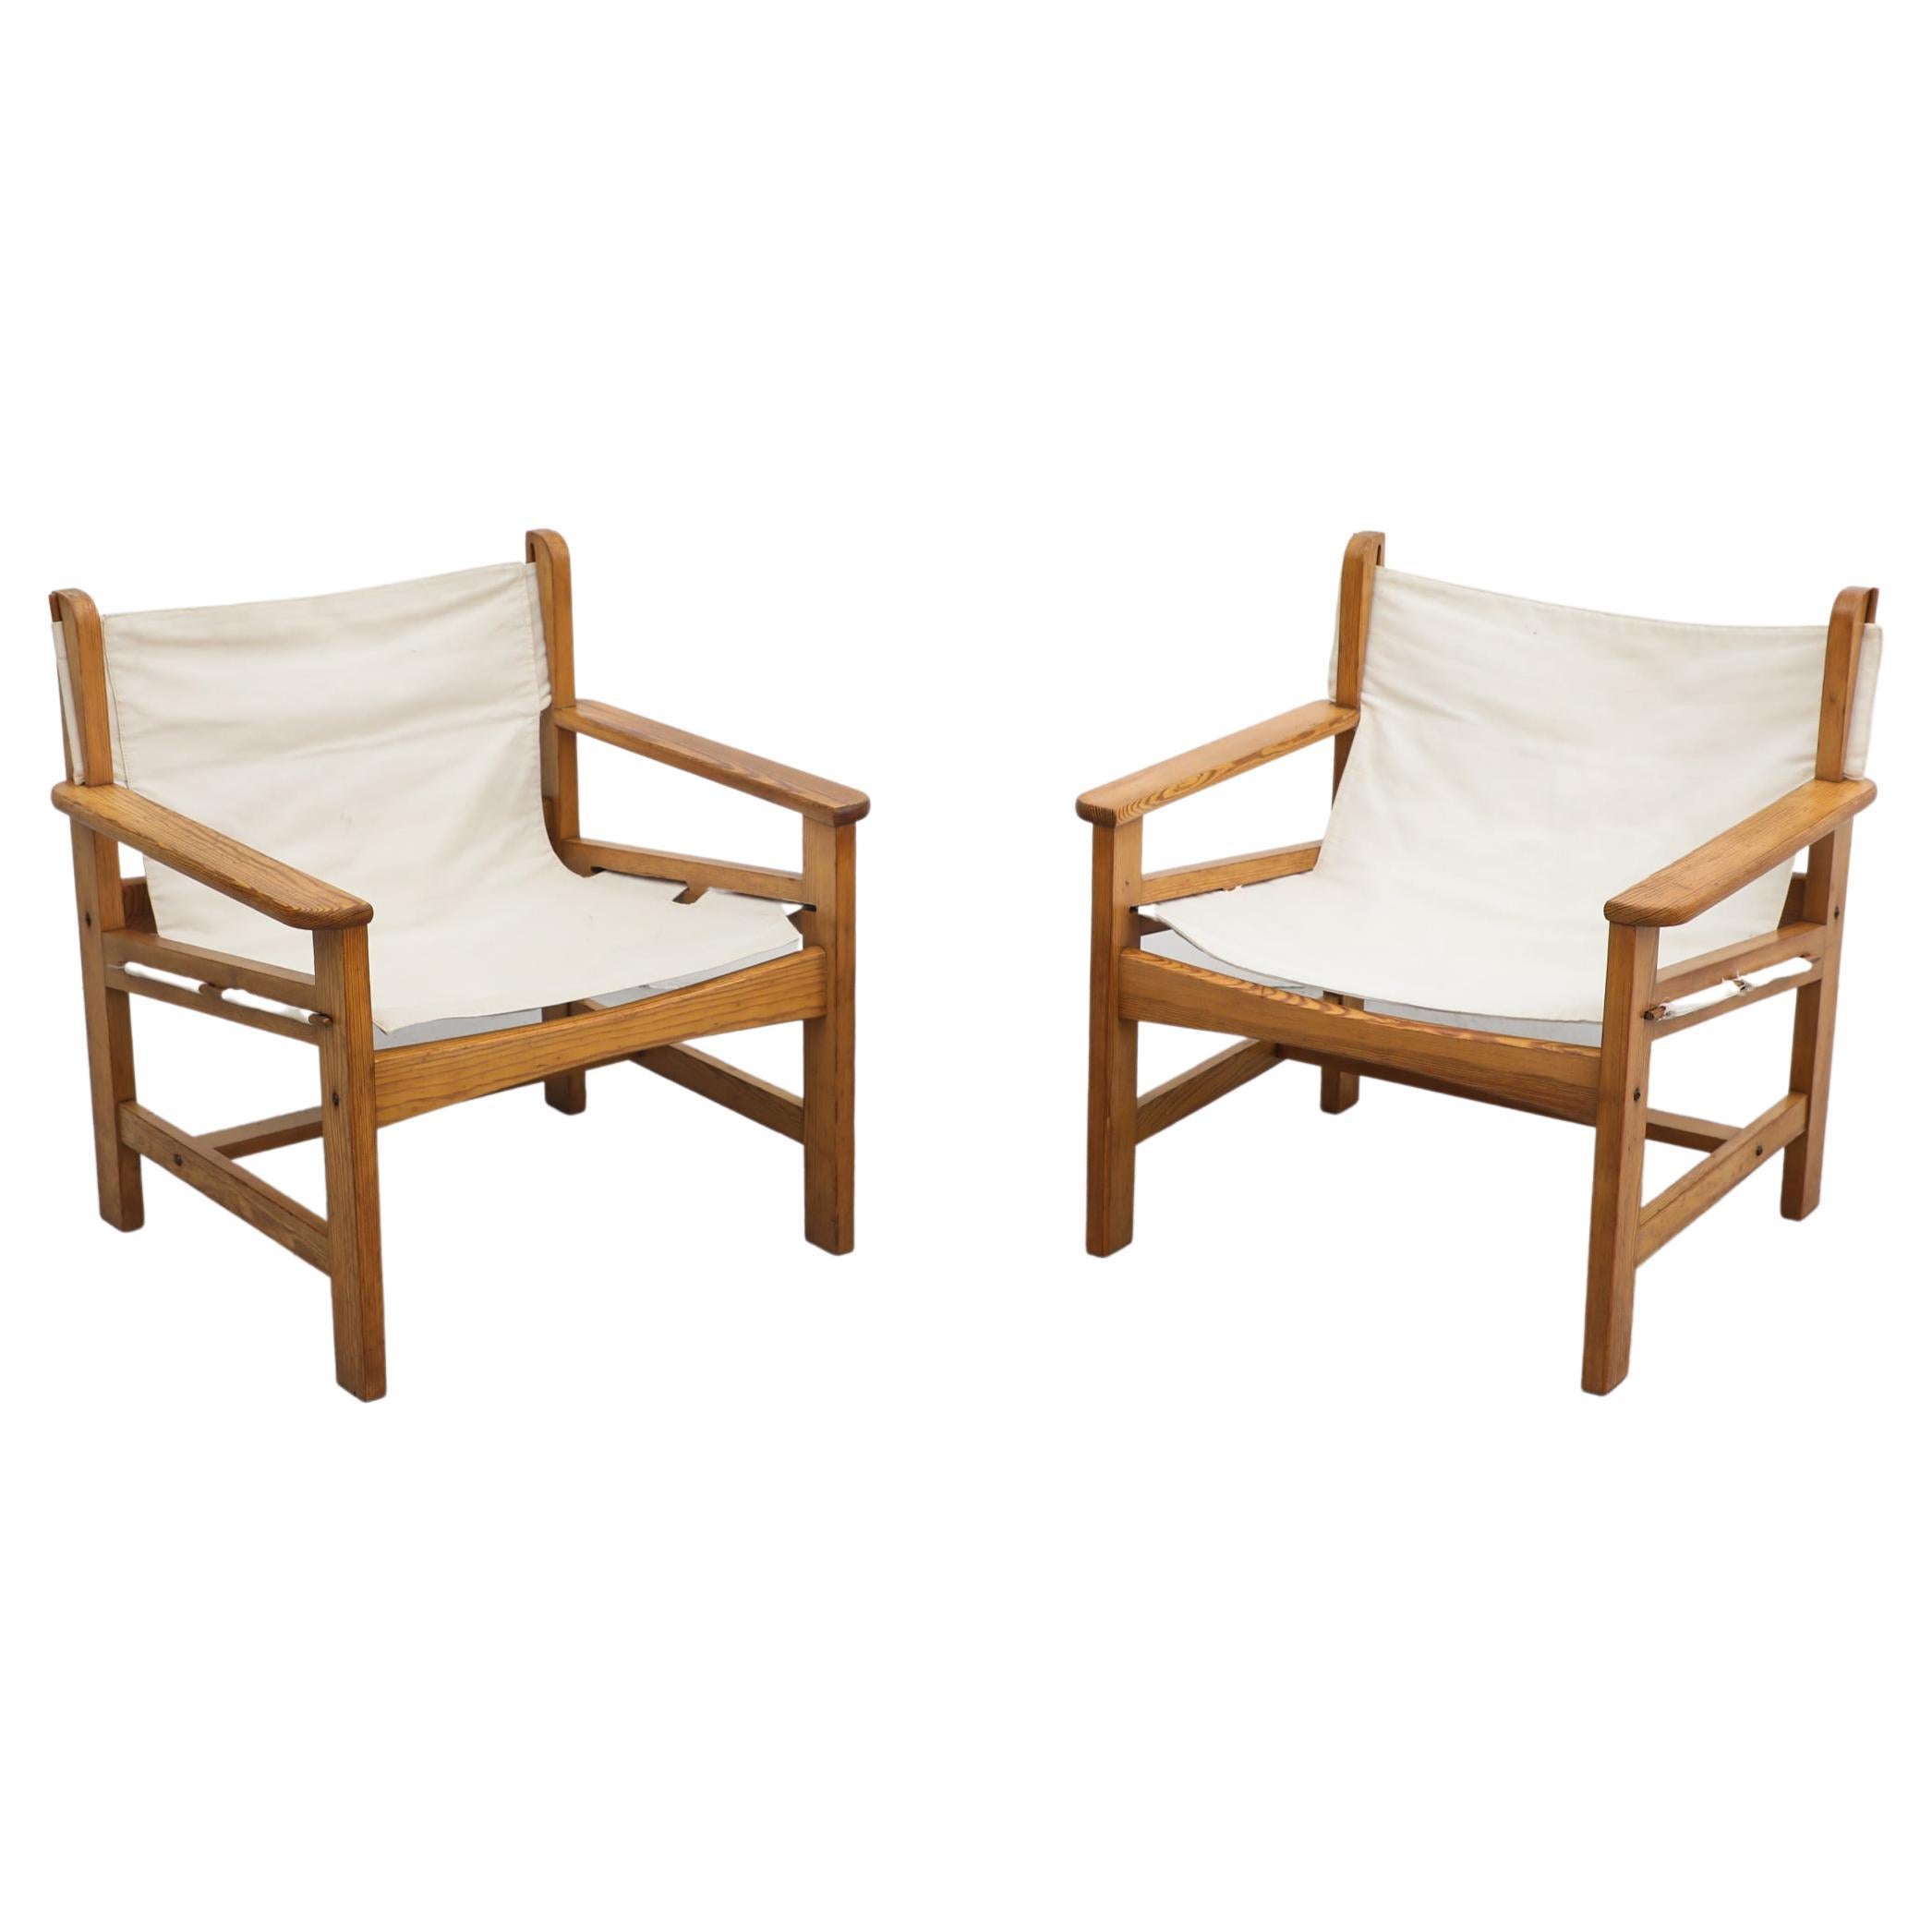 Pair of Borge Mogensen Style Pine and Canvas Safari Chairs